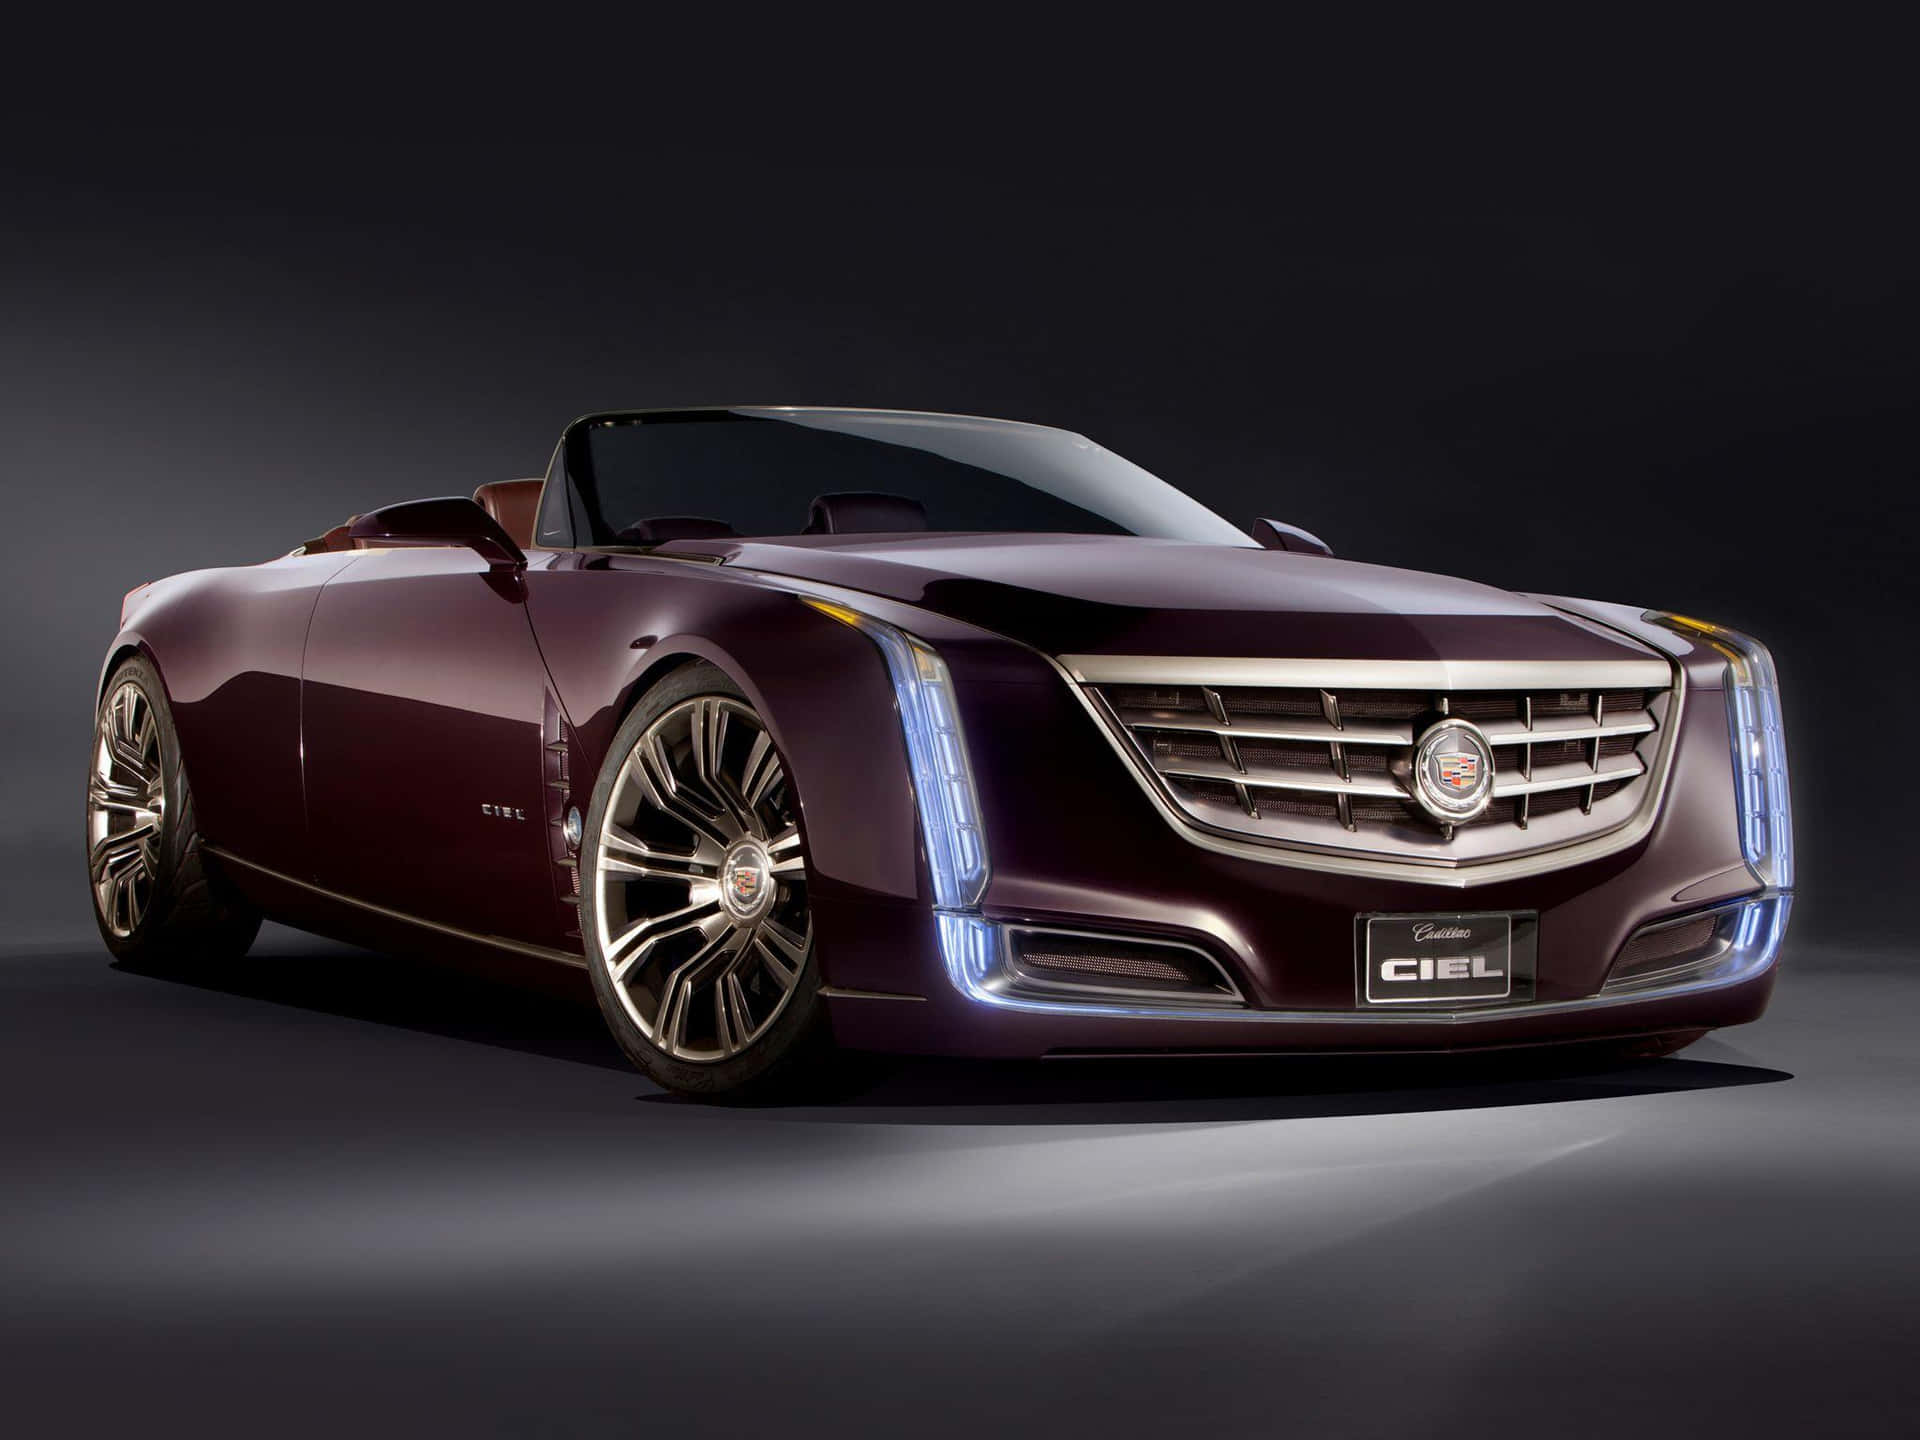 Experience the legendary luxury of Cadillac